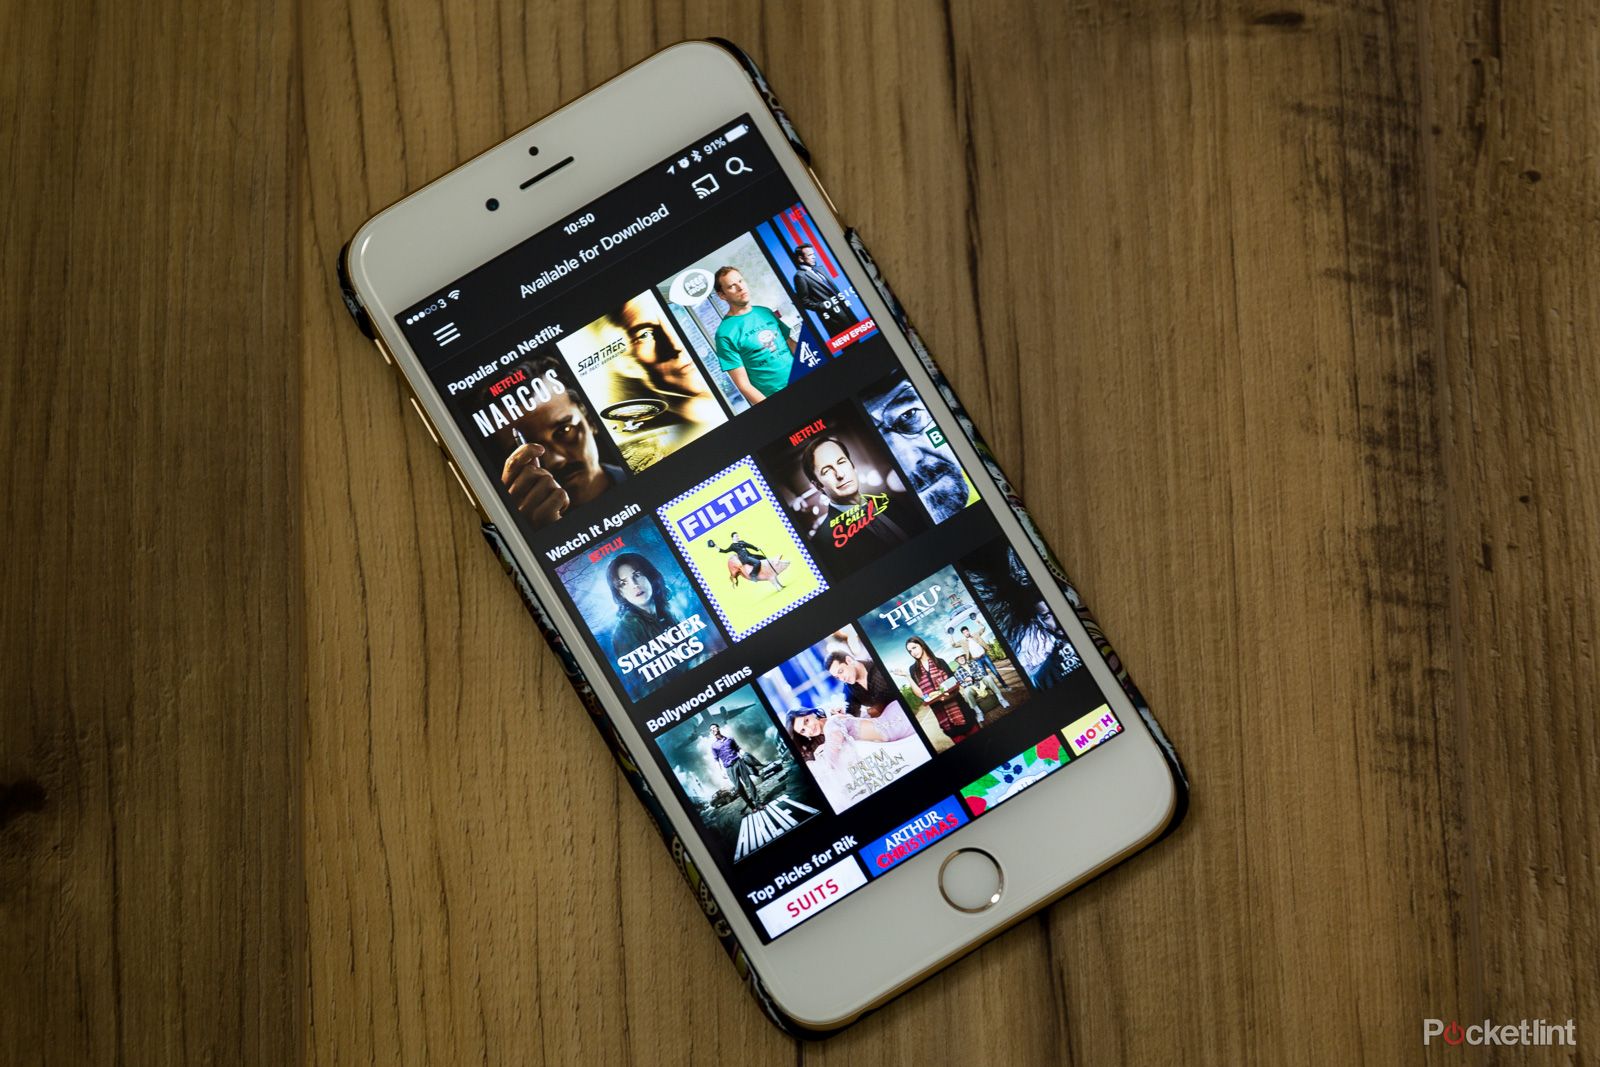 netflix tv shows and movies may end up different on mobile to bigger screen versions image 1